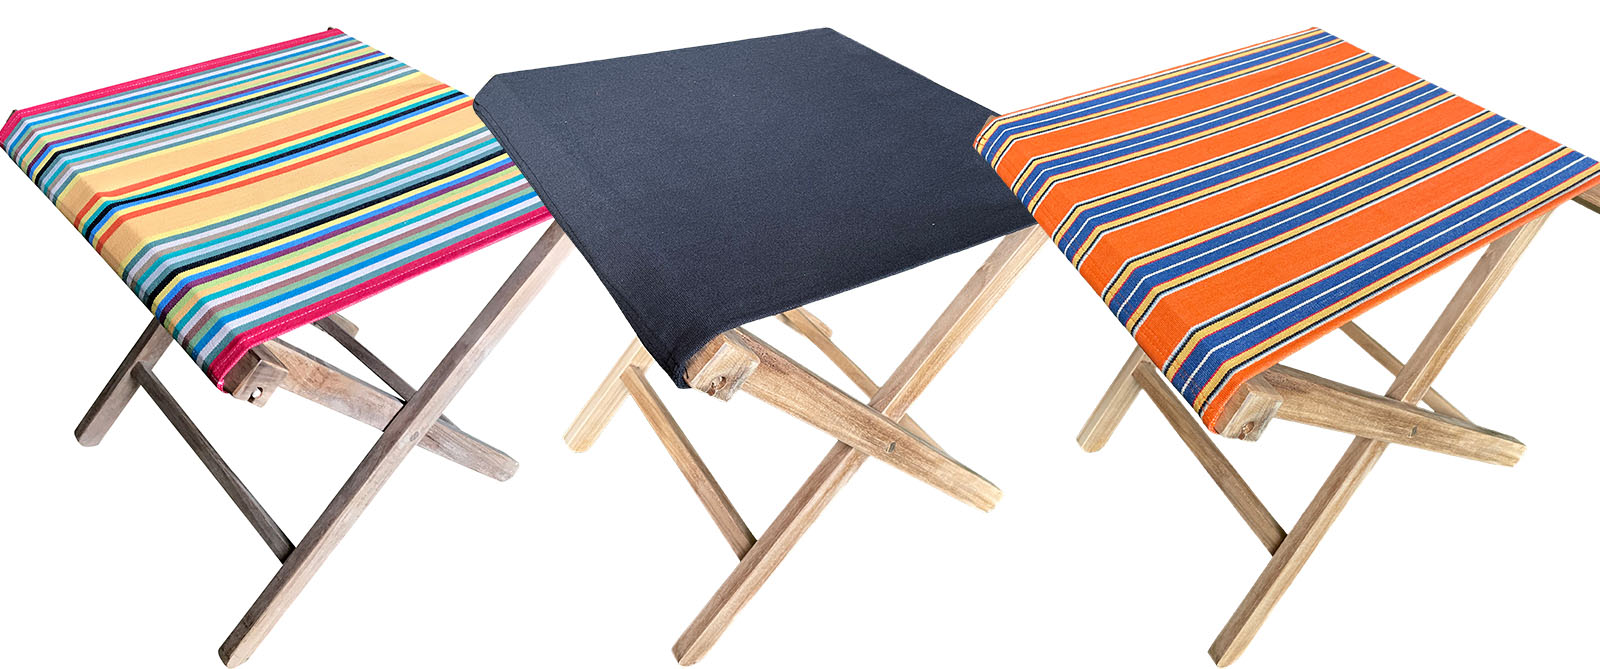 Replacement seats for Portable Folding Stools with Striped Seats